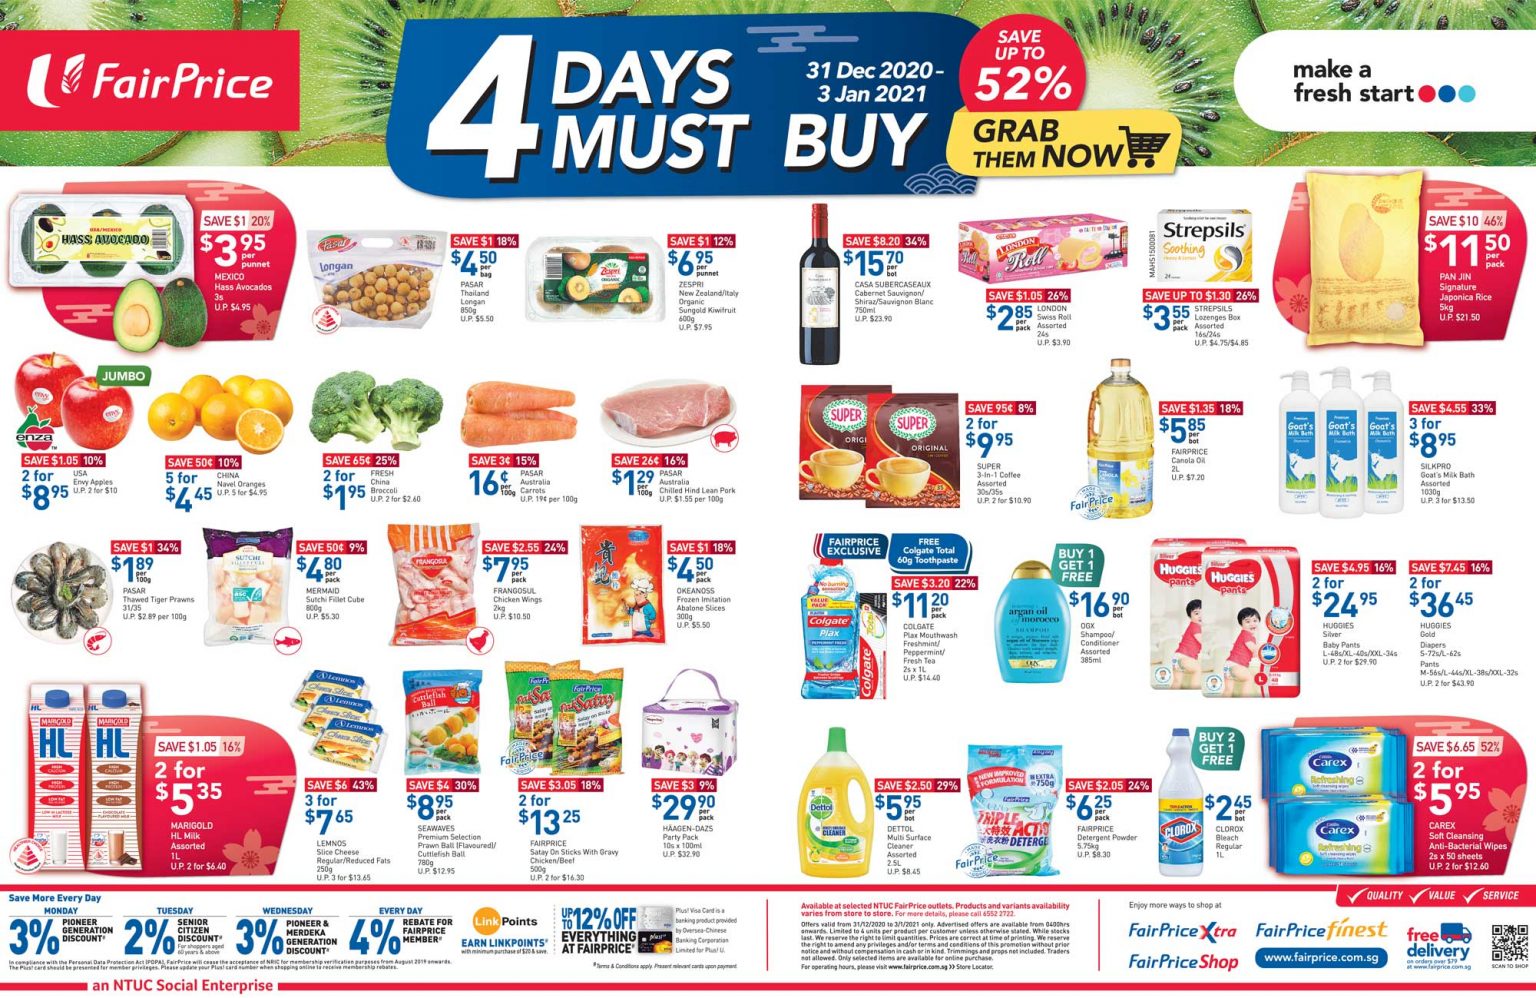 FairPrice’s 4 days must-buy items from 31 Dec 2020 - 3 Jan 2021